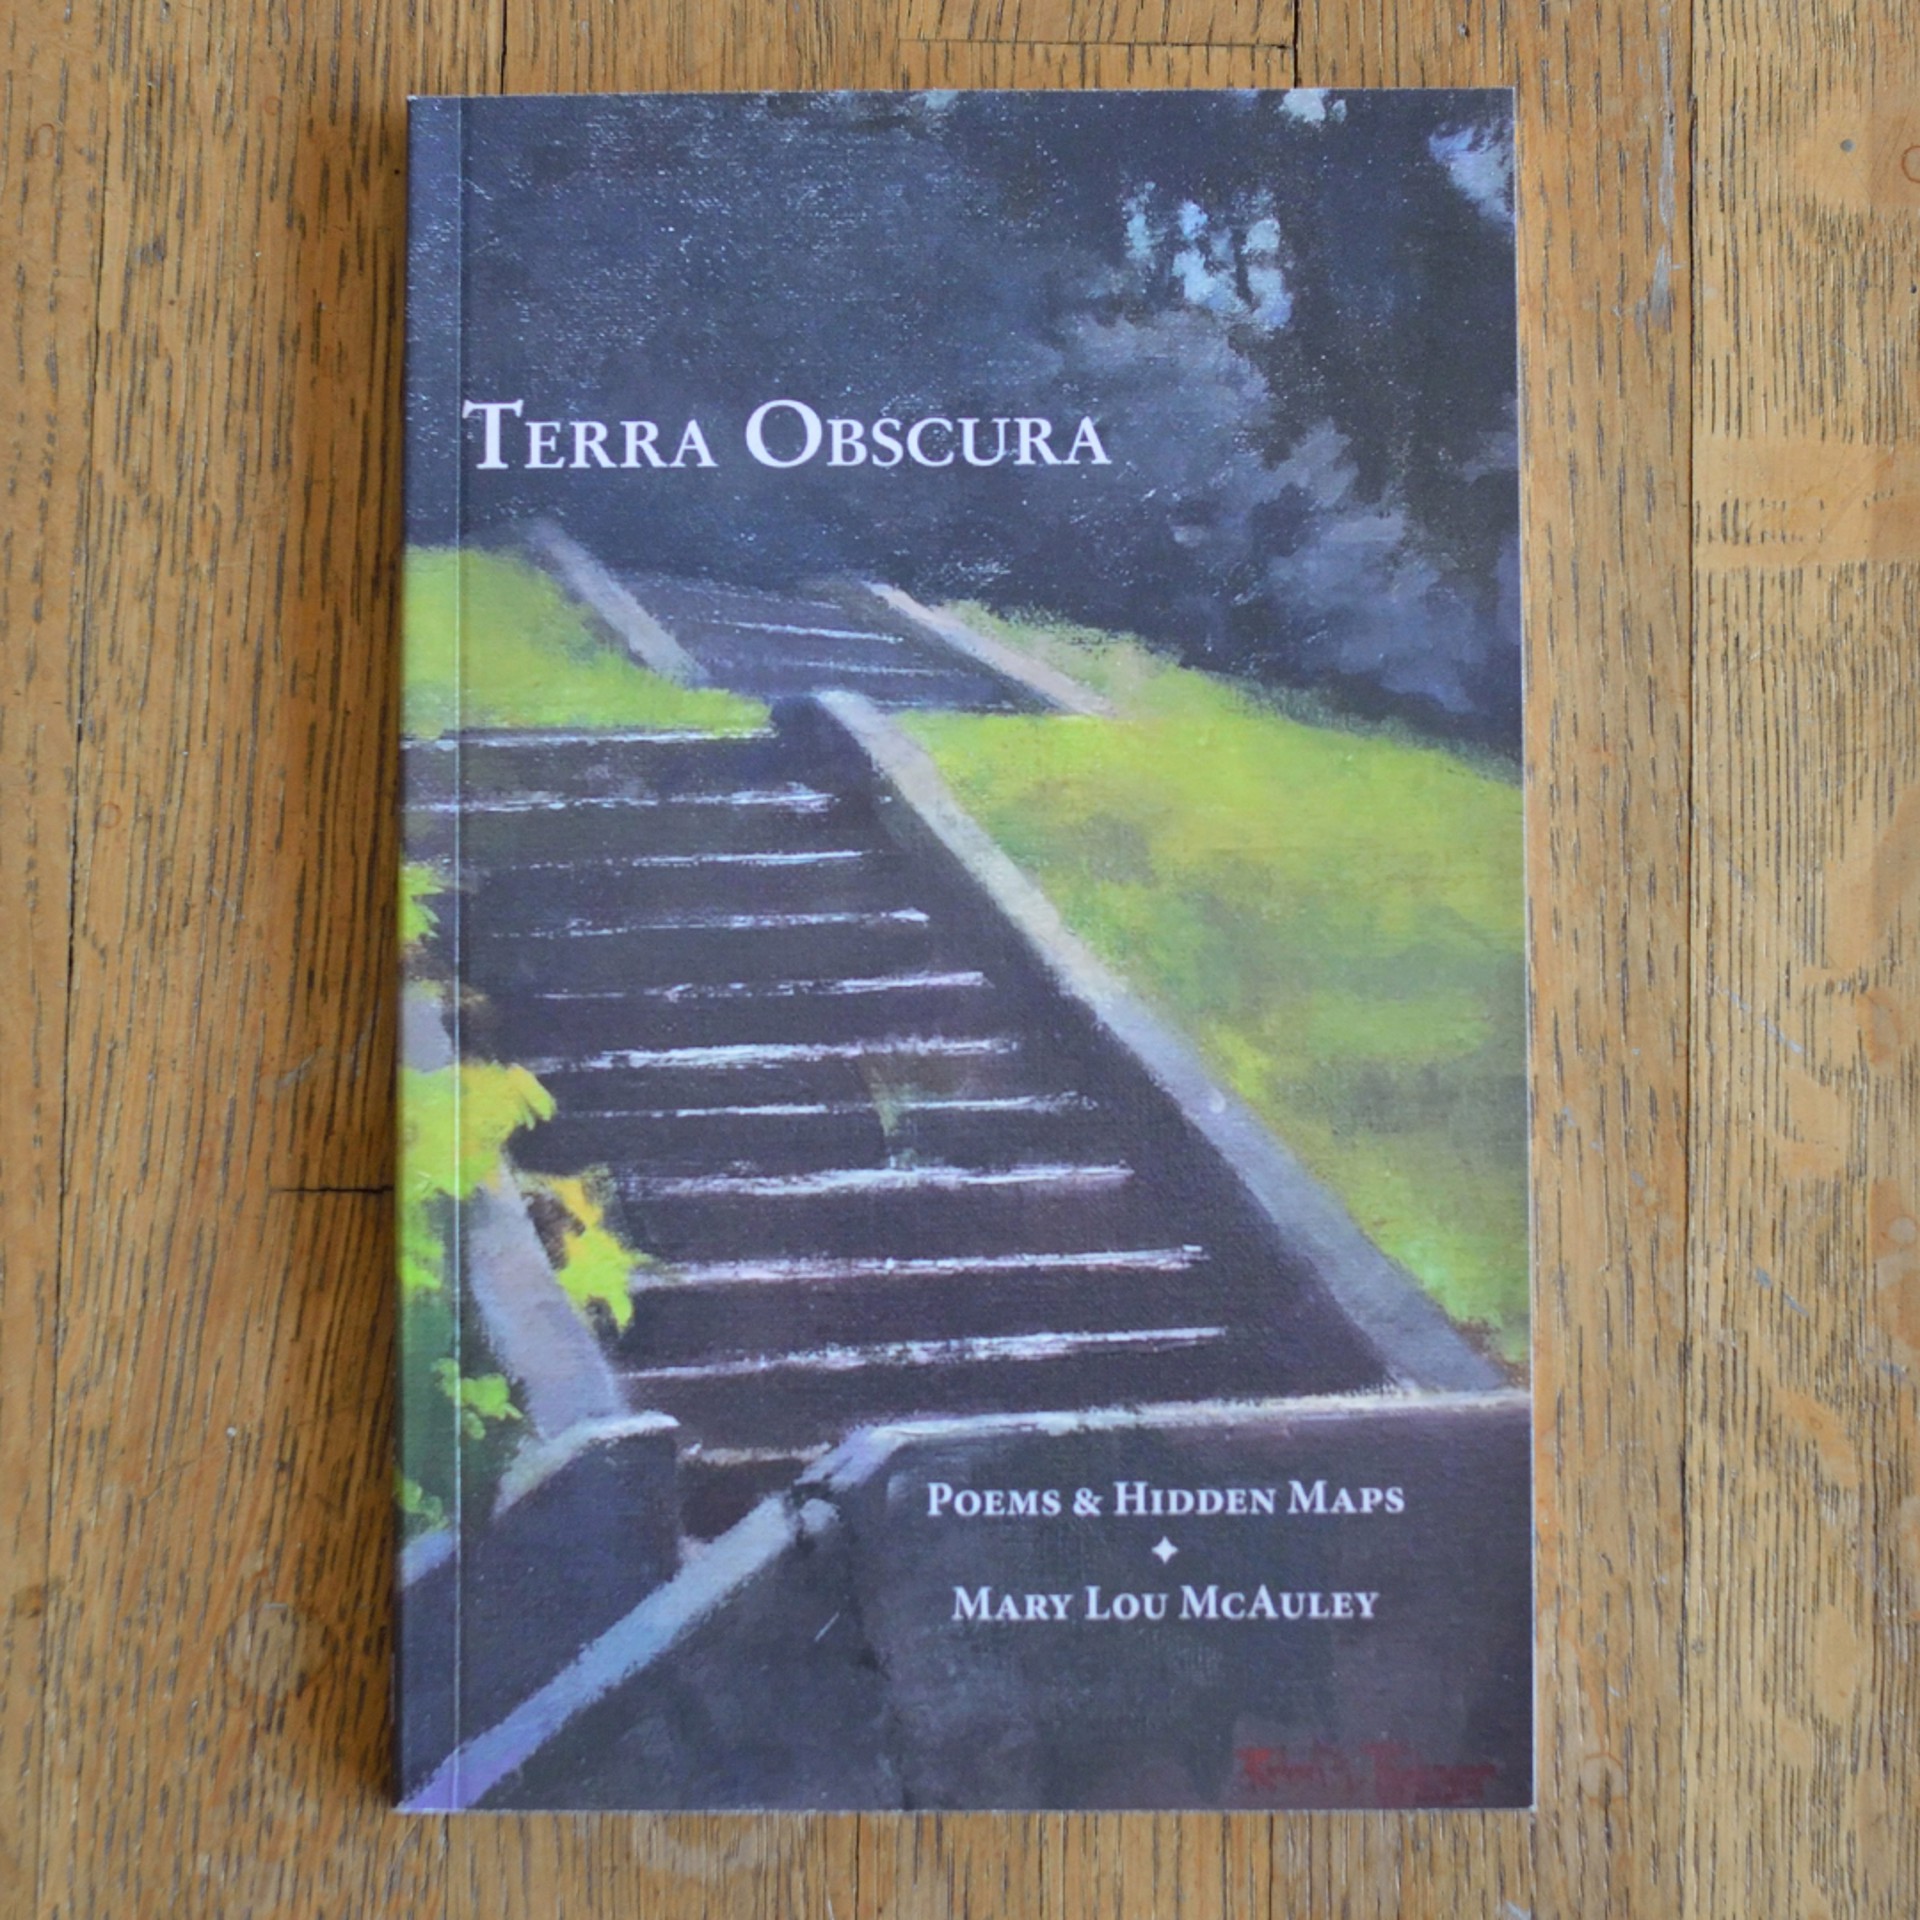 Terra Obscura by Mary Lou McAuley